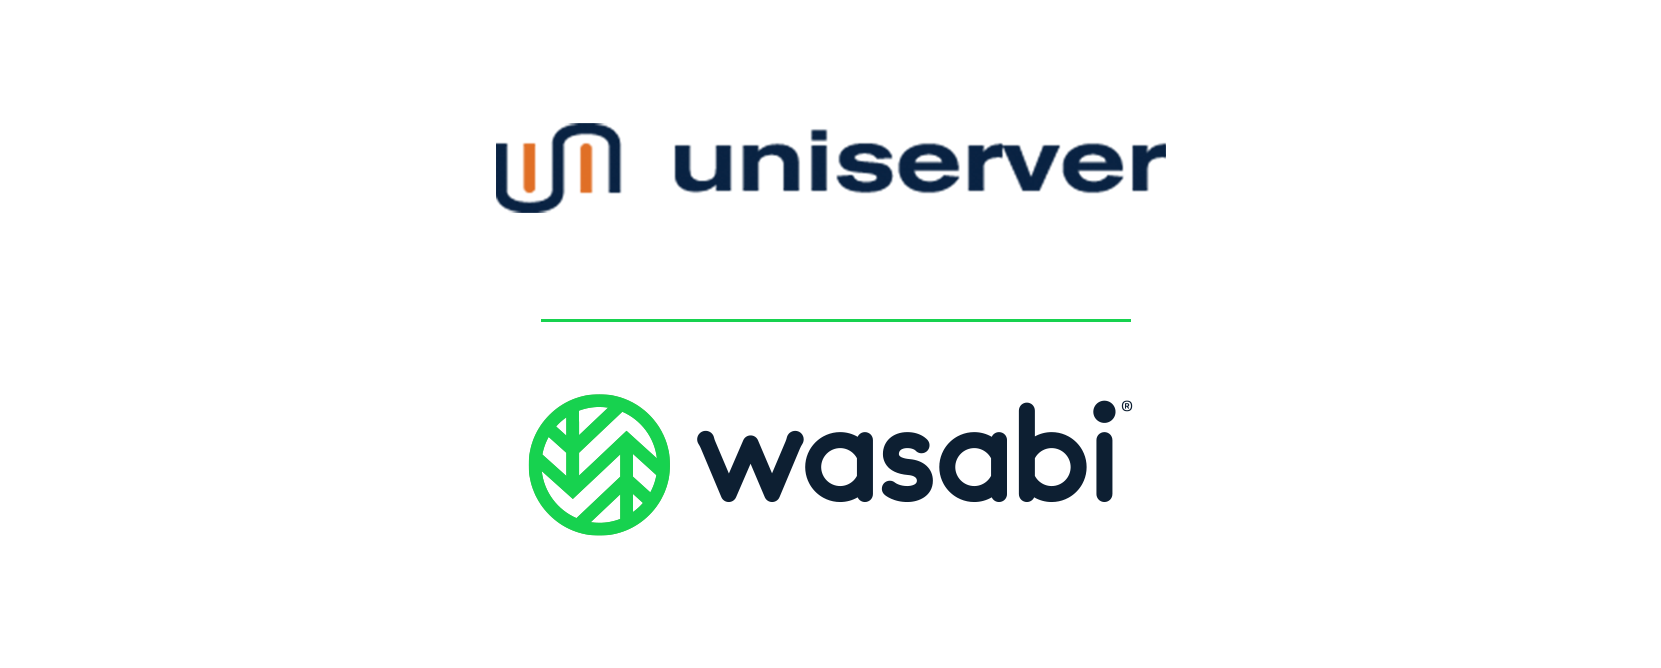 Uniserver partners with Wasabi® Hot Cloud Storage to deliver new STaaS ...